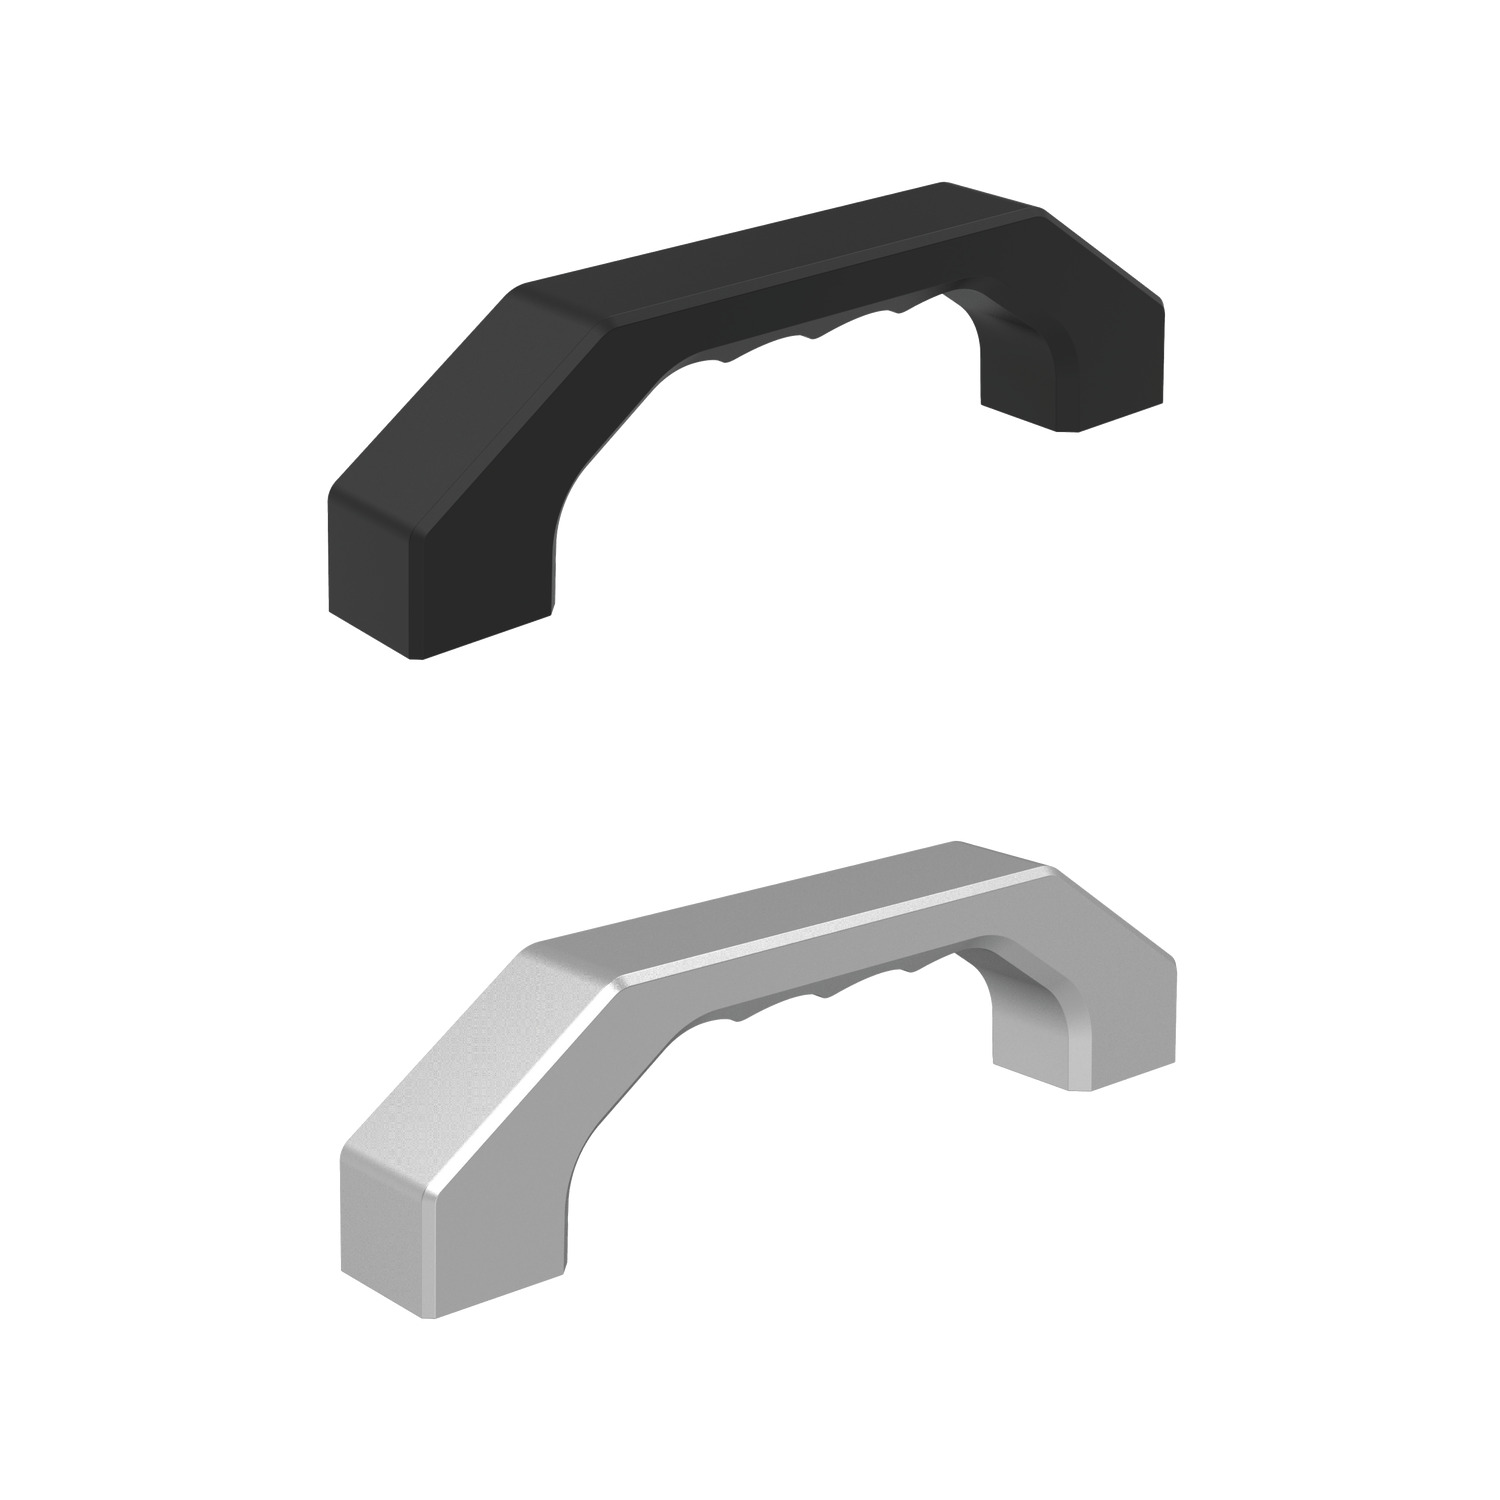 Pull Handles - Grip type Solid aluminium handles with grooves for an extra grip design, ideal for heavy duty industrial use. Minimum stress resistance &gt;1000N.